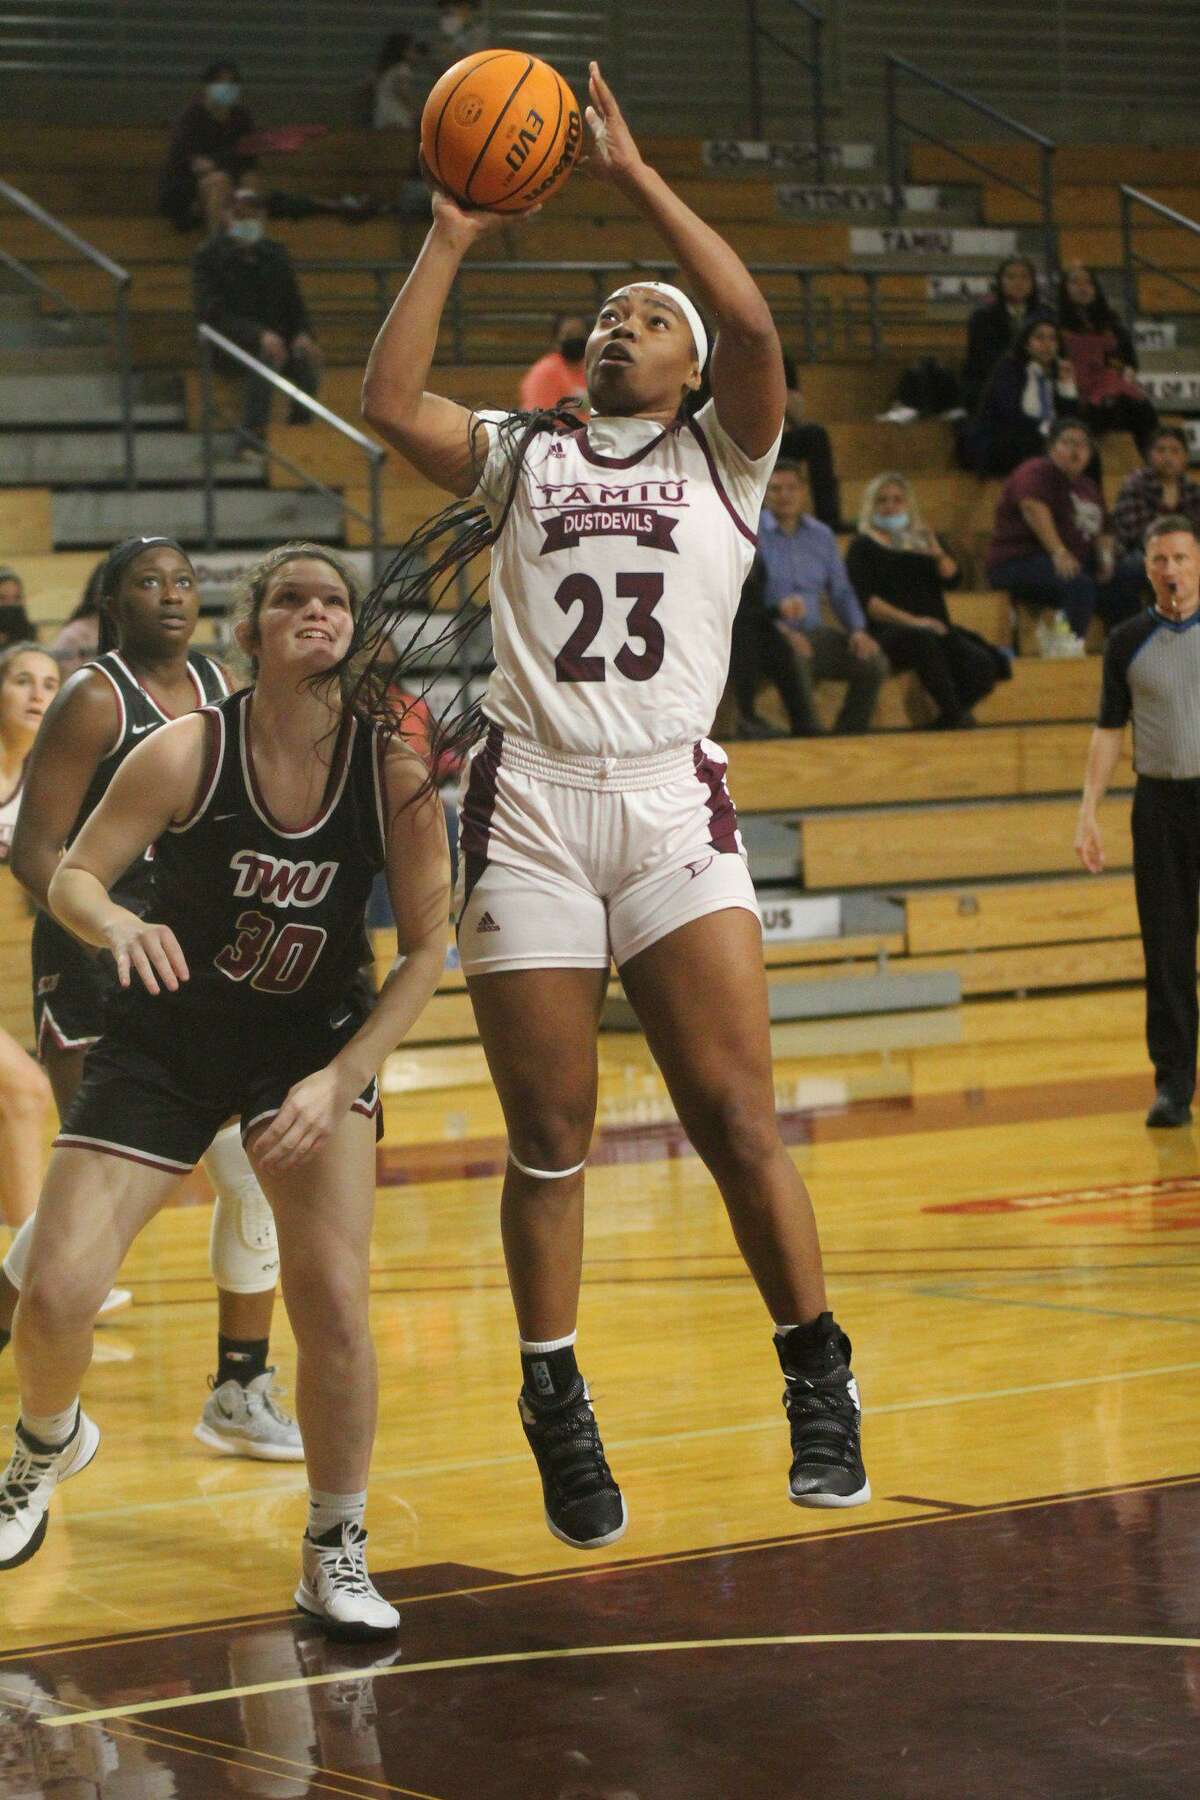 Rai Brown scored 19 points in Texas A&M International’s win over Texas Woman’s University on Thursday.